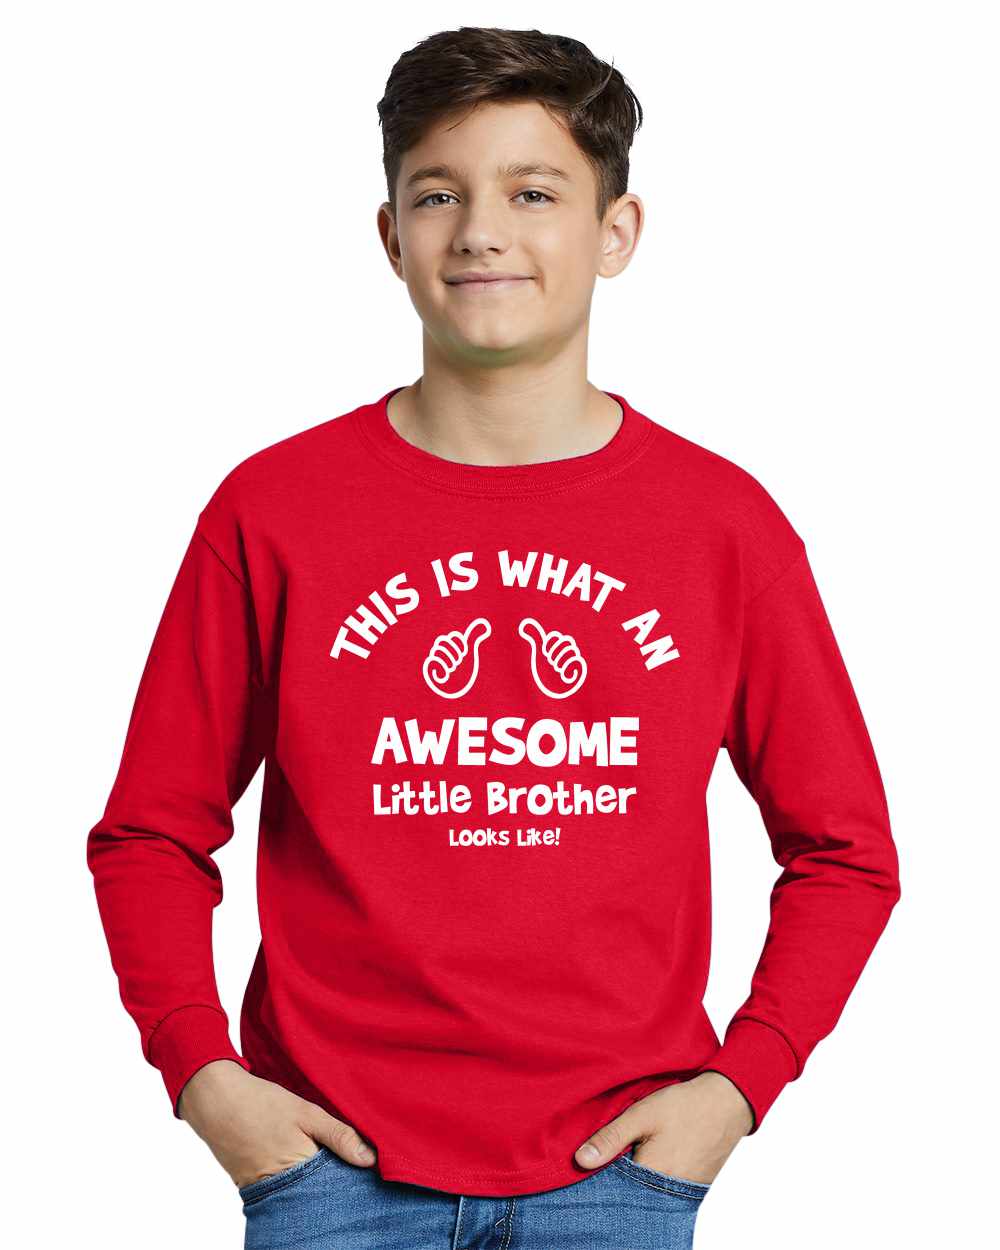 This is What an AWESOME LITTLE BROTHER Looks Like on Youth Long Sleeve Shirt